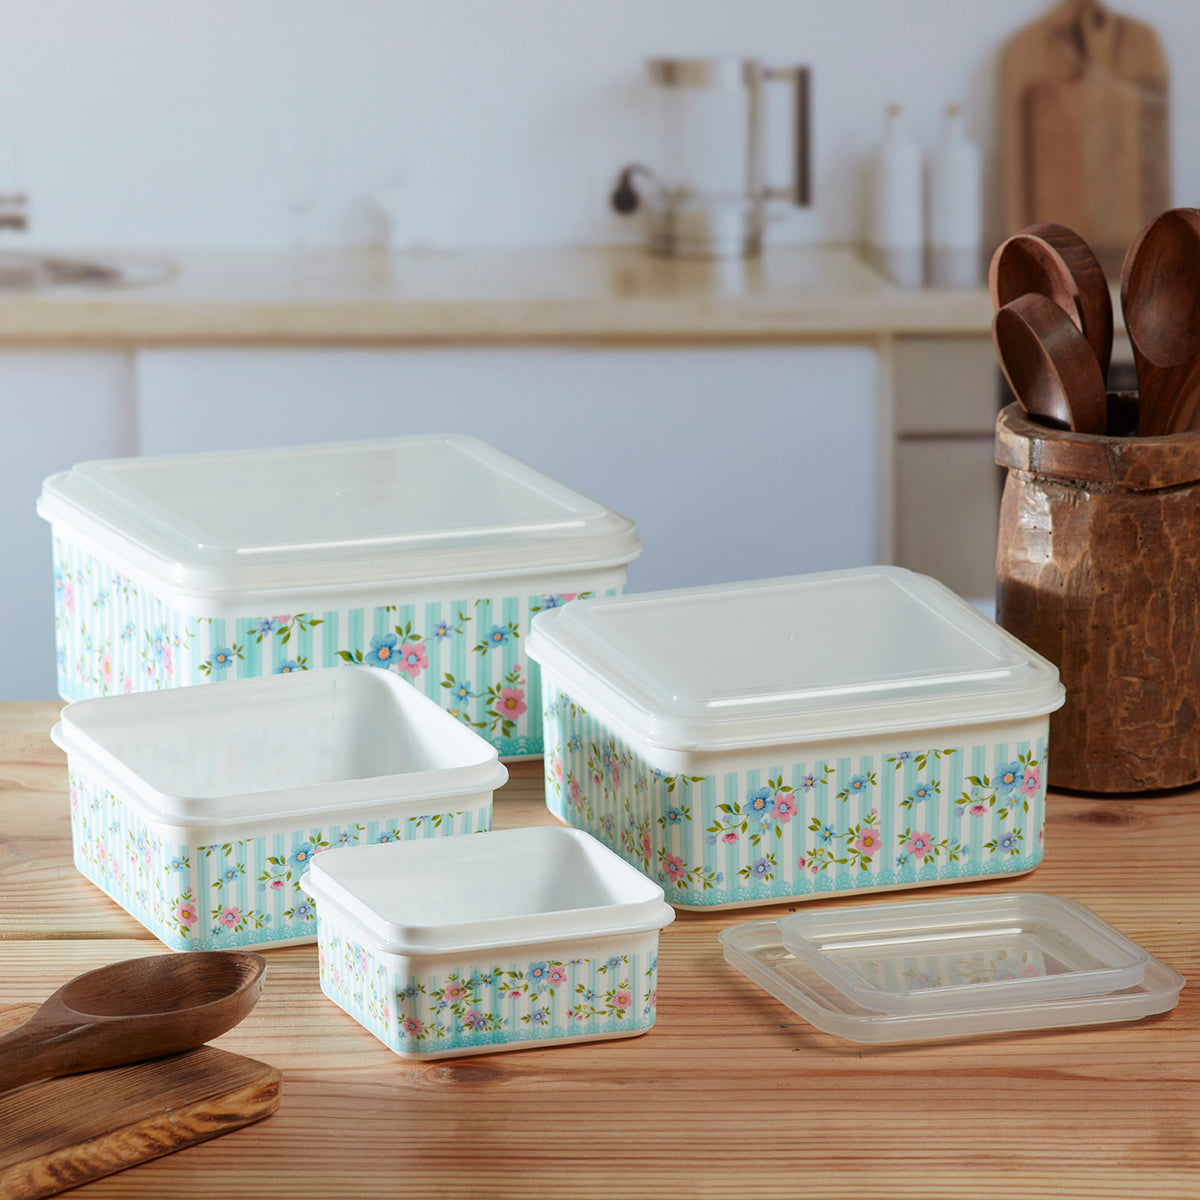 Plastic Airtight Food Storage Container with Lid, Set of 4, Square (141-1C)